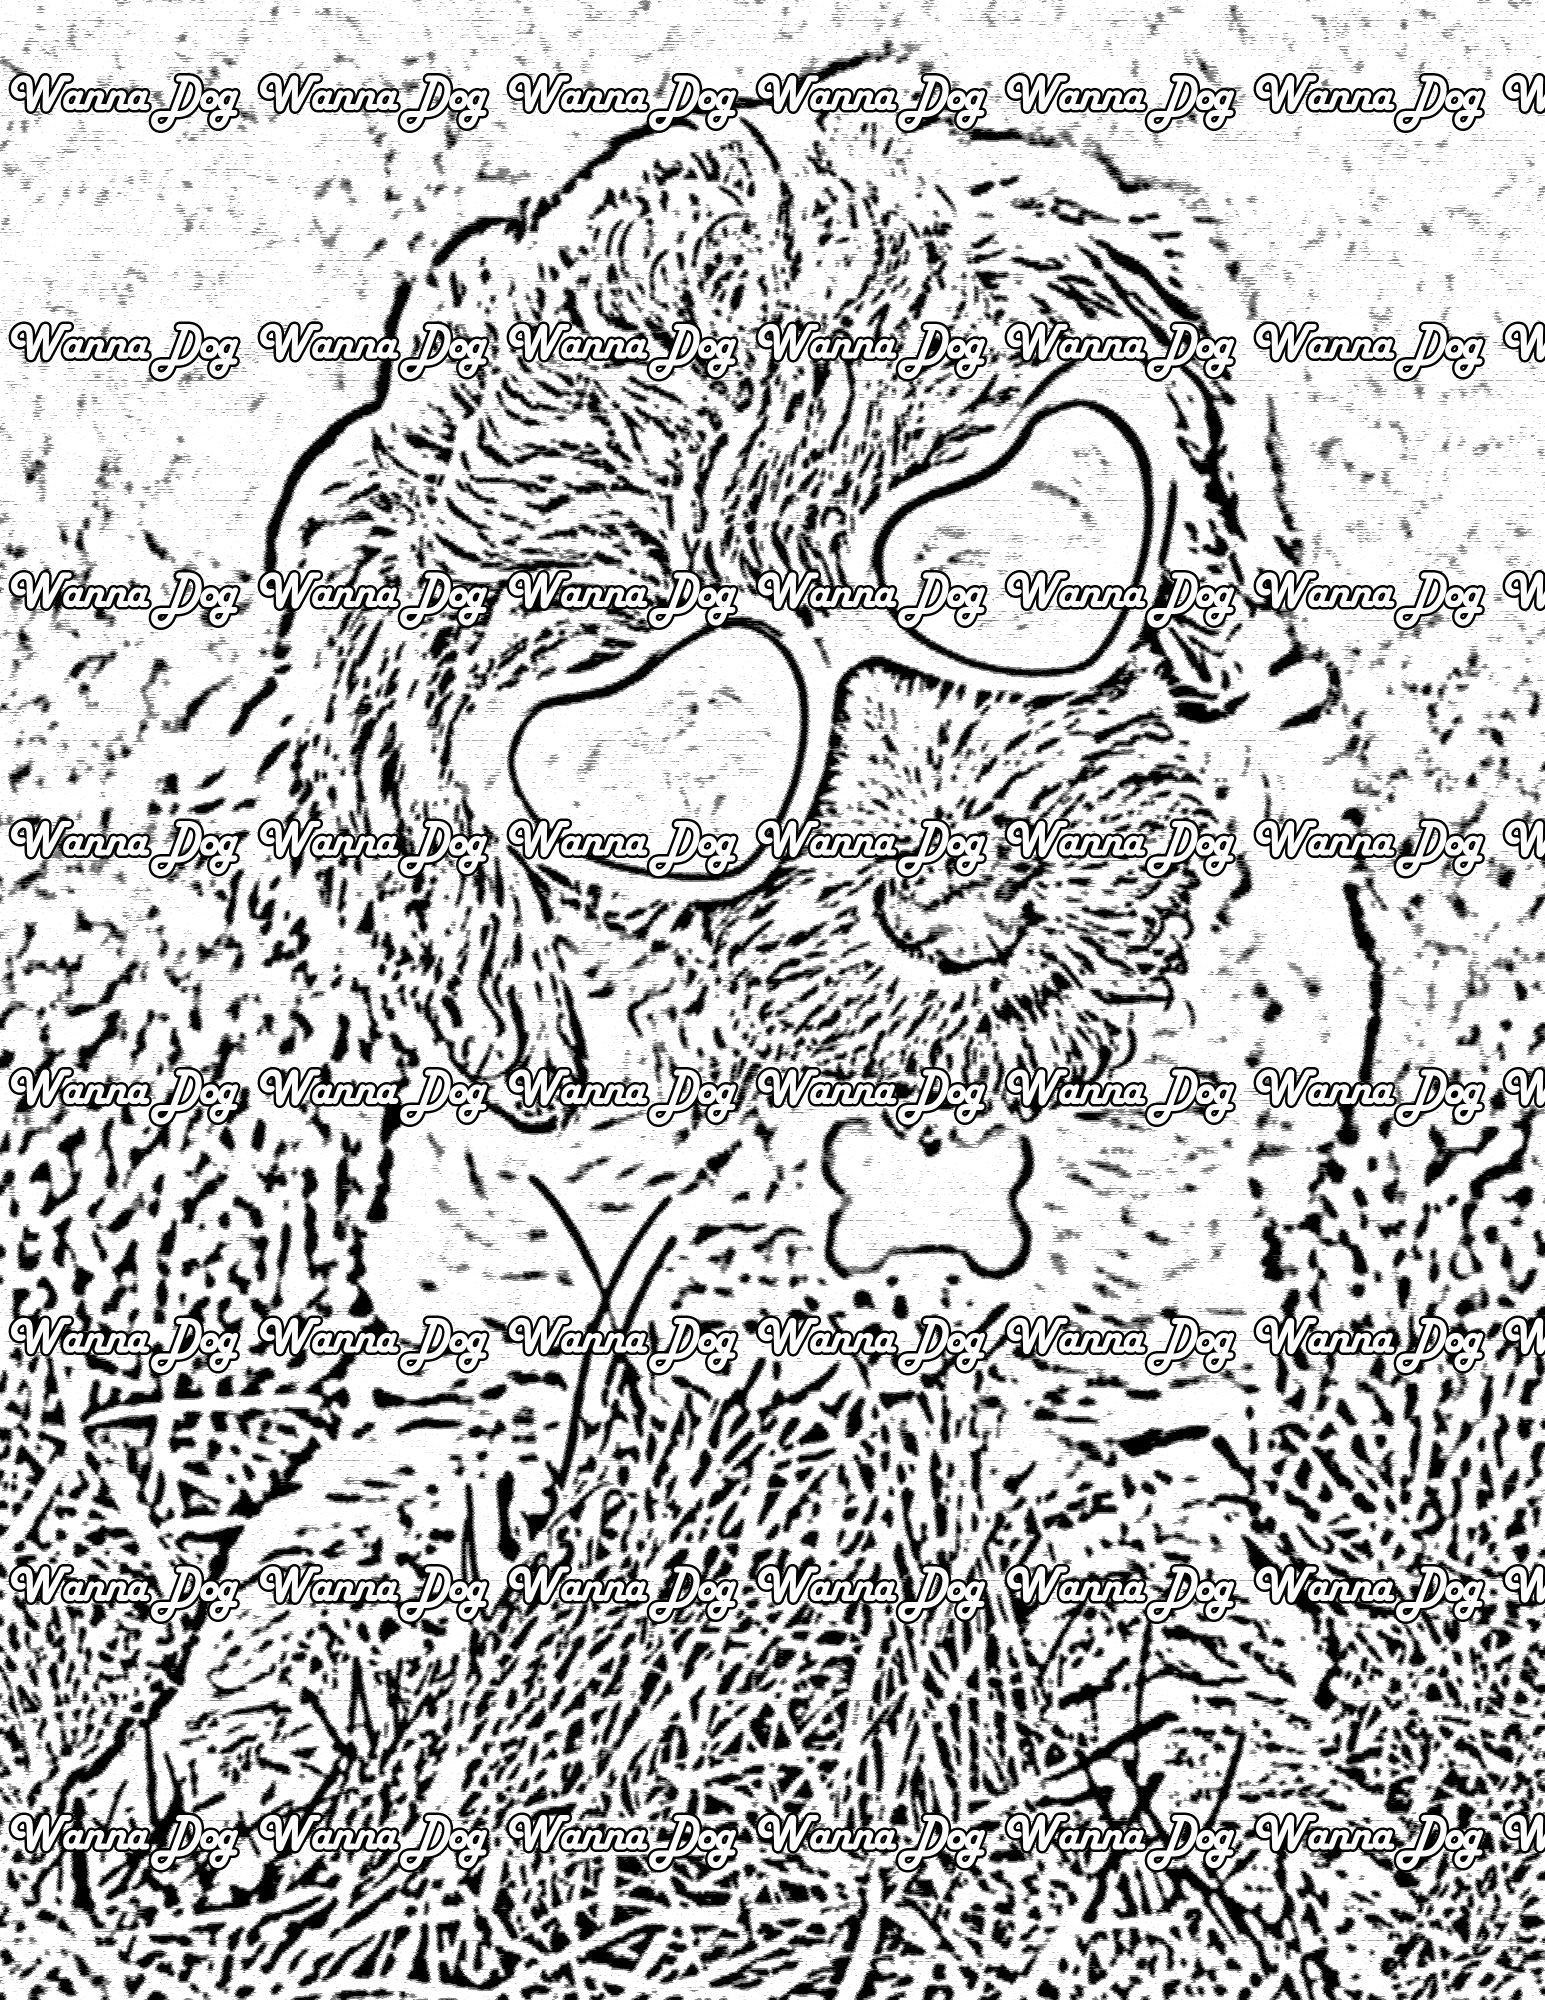 Labradoodle Coloring Page of a Labradoodle wearing sunglasses